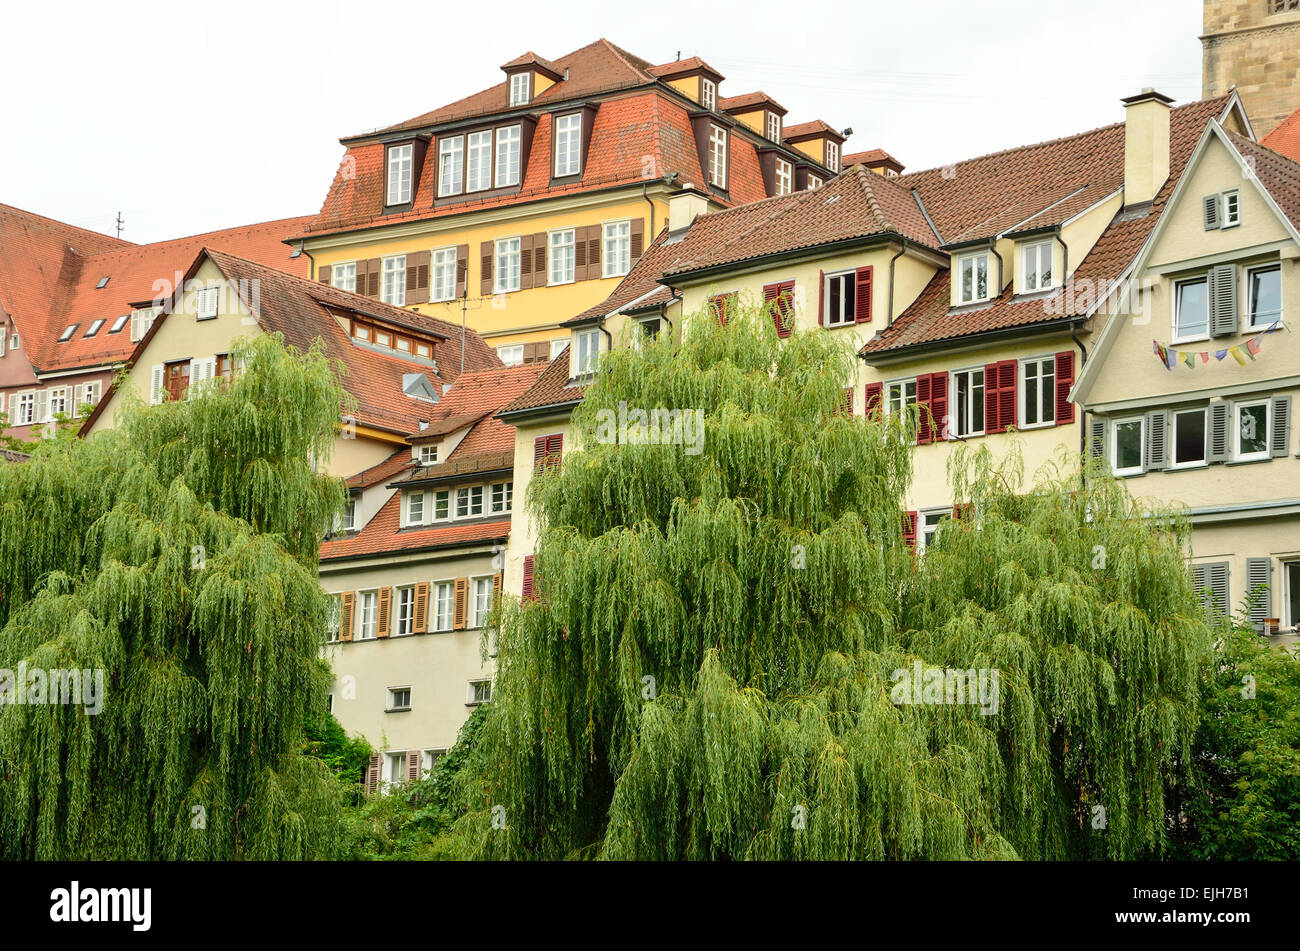 View of the old town of Tuebingen, Germany Stock Photo